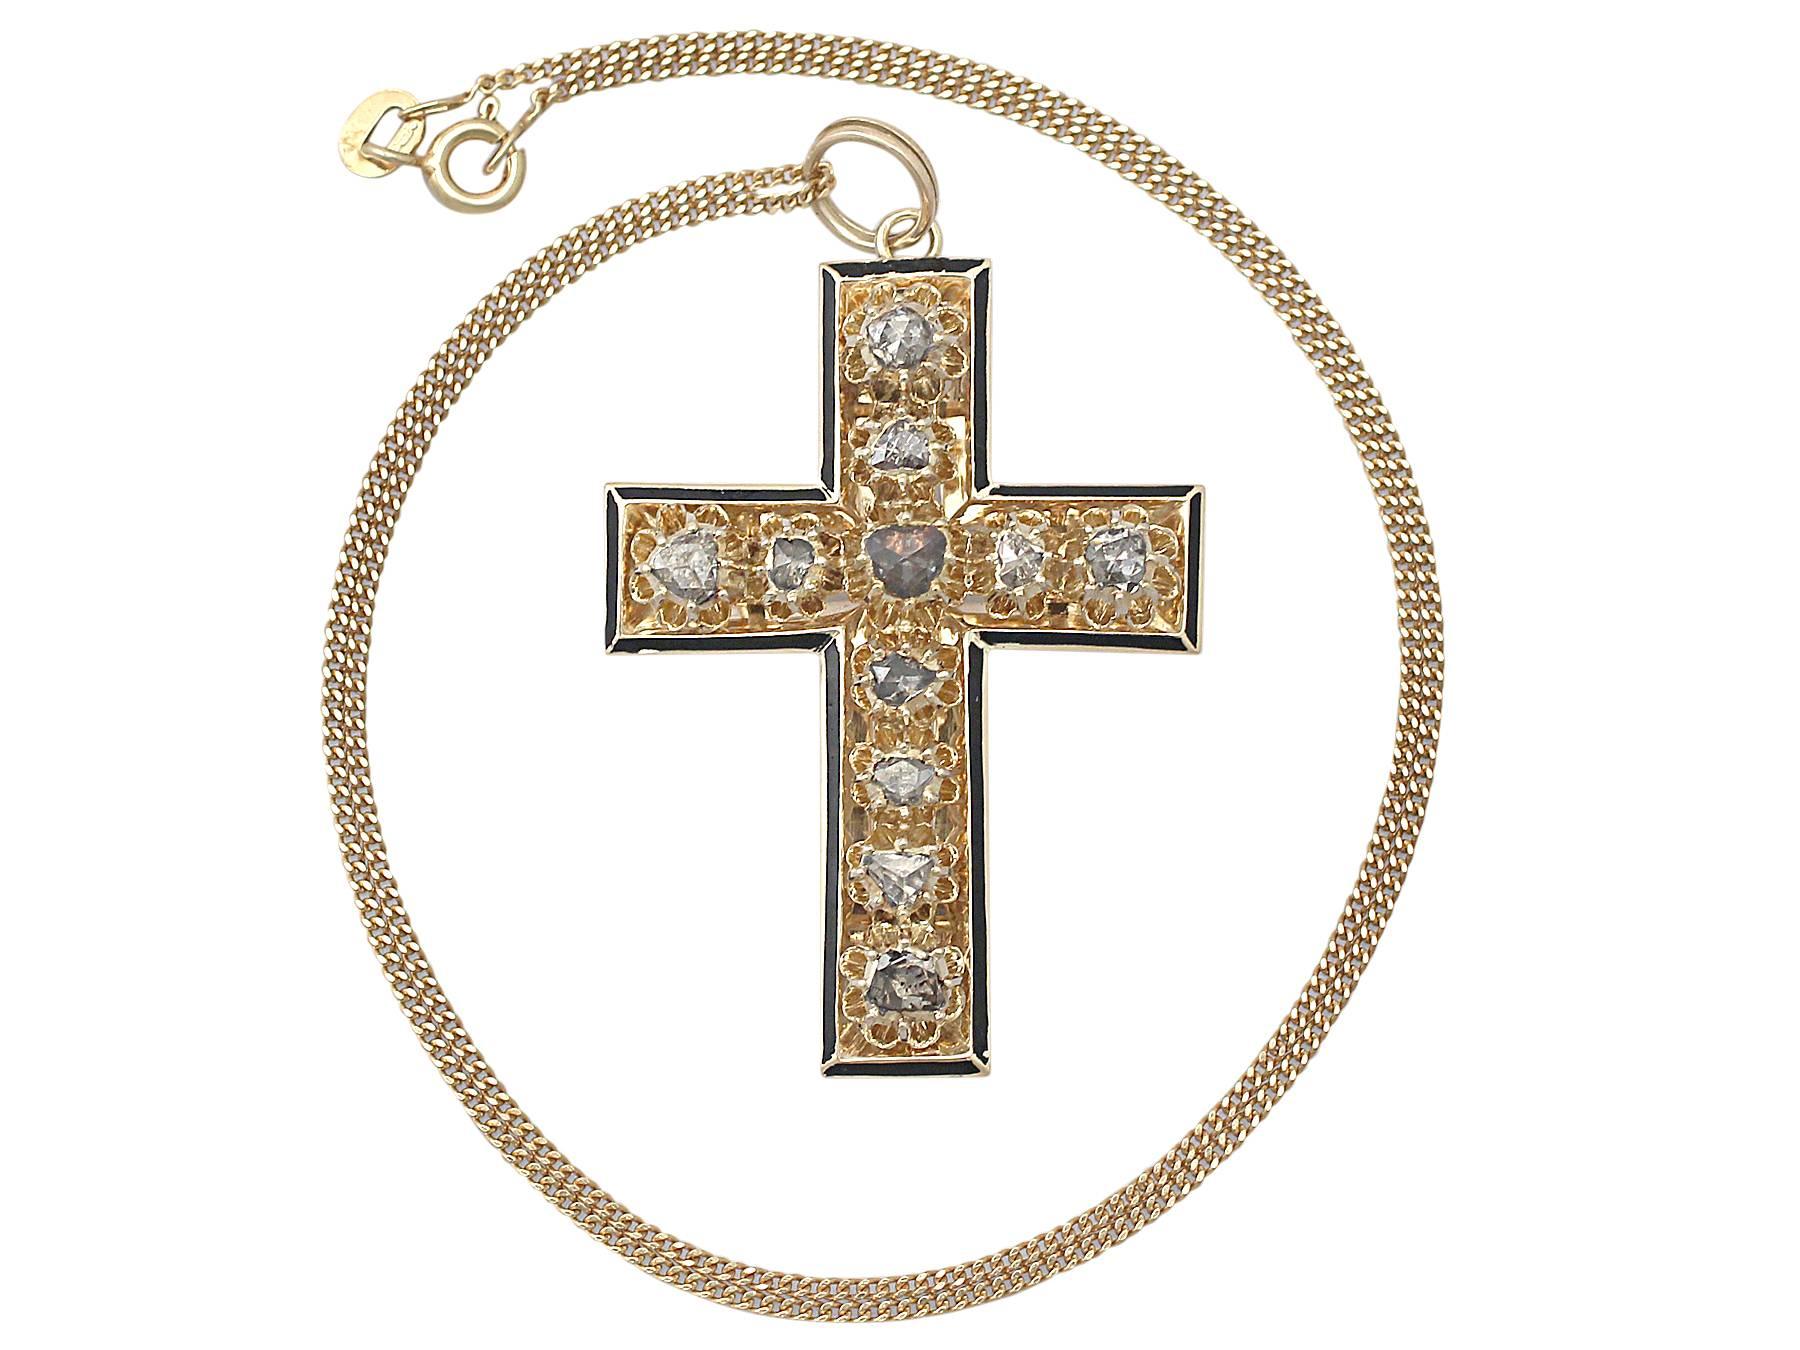 A stunning, fine and impressive antique Victorian 1.42 carat diamond, black enamel and 14 karat yellow gold cross pendant; part of our diverse antique jewelry and estate jewelry collections

This stunning, fine and impressive Victorian cross pendant